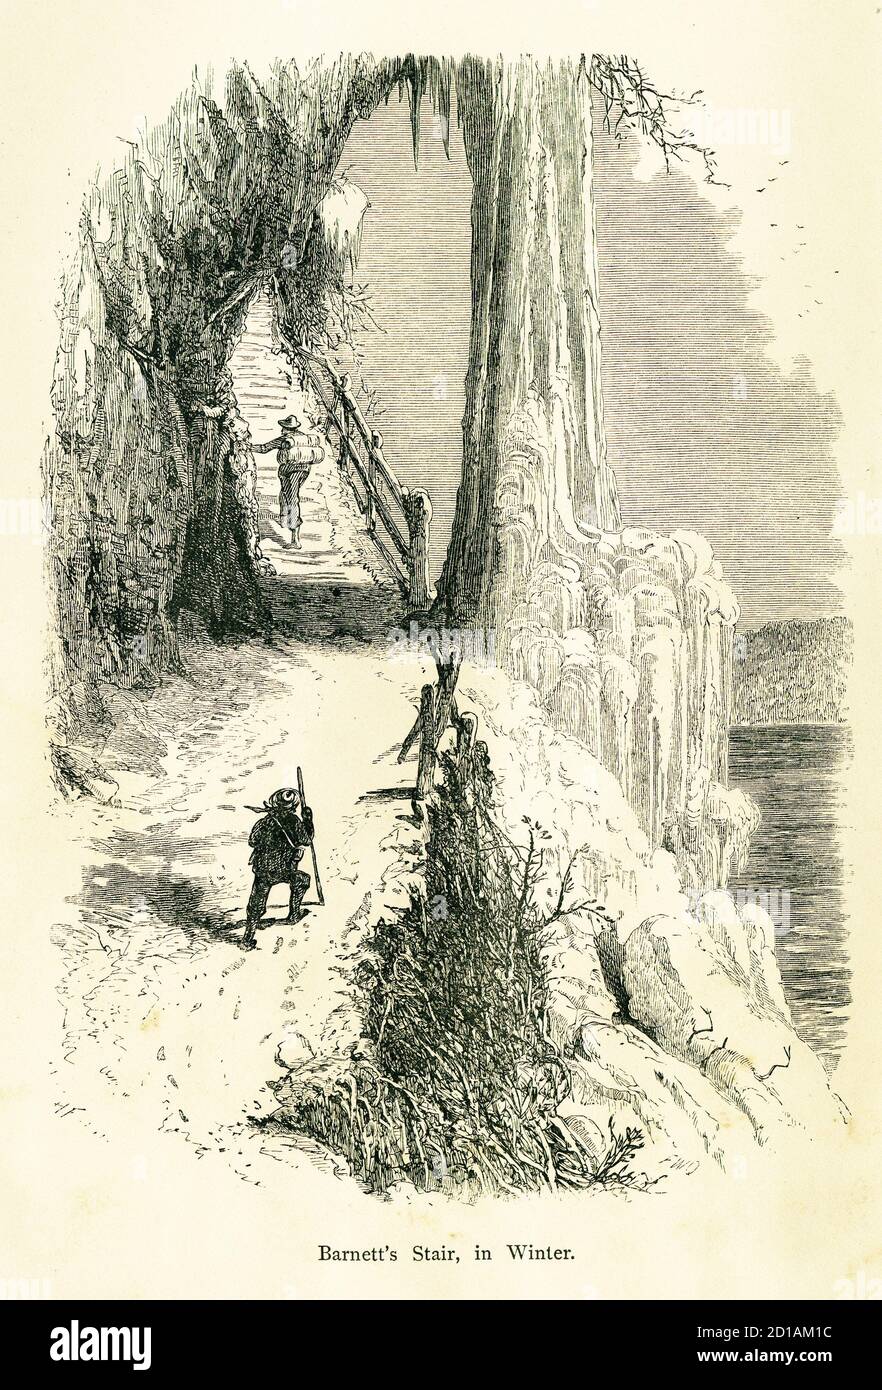 Antique illustration of Barnett's Stair, Ontario, USA in winter. Engraving published in Picturesque America or the Land We Live In (D. Appleton & Co., Stock Photo